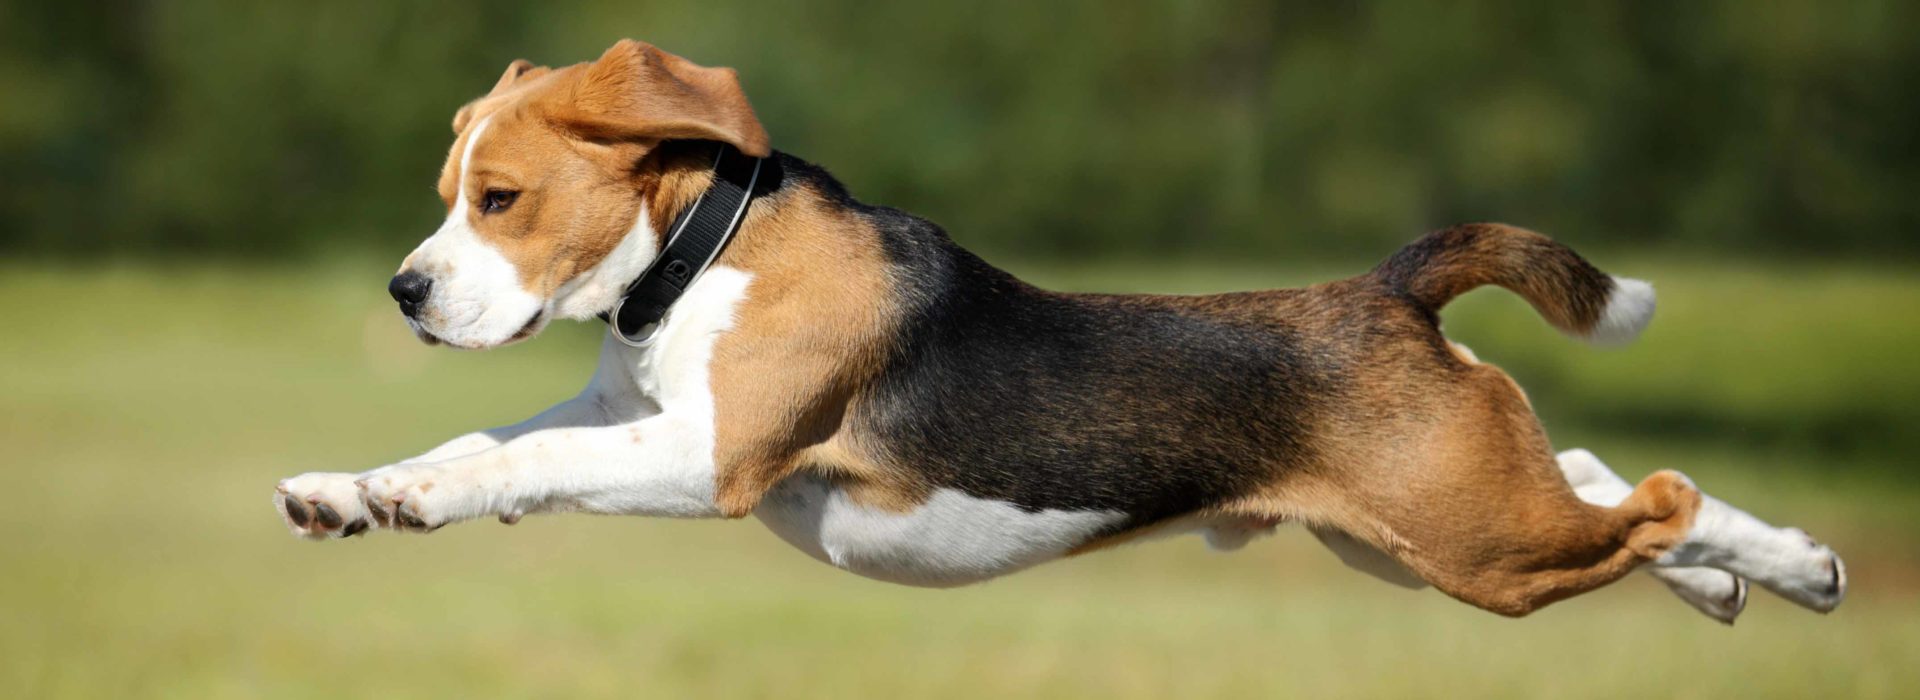 a healthy leaping dog